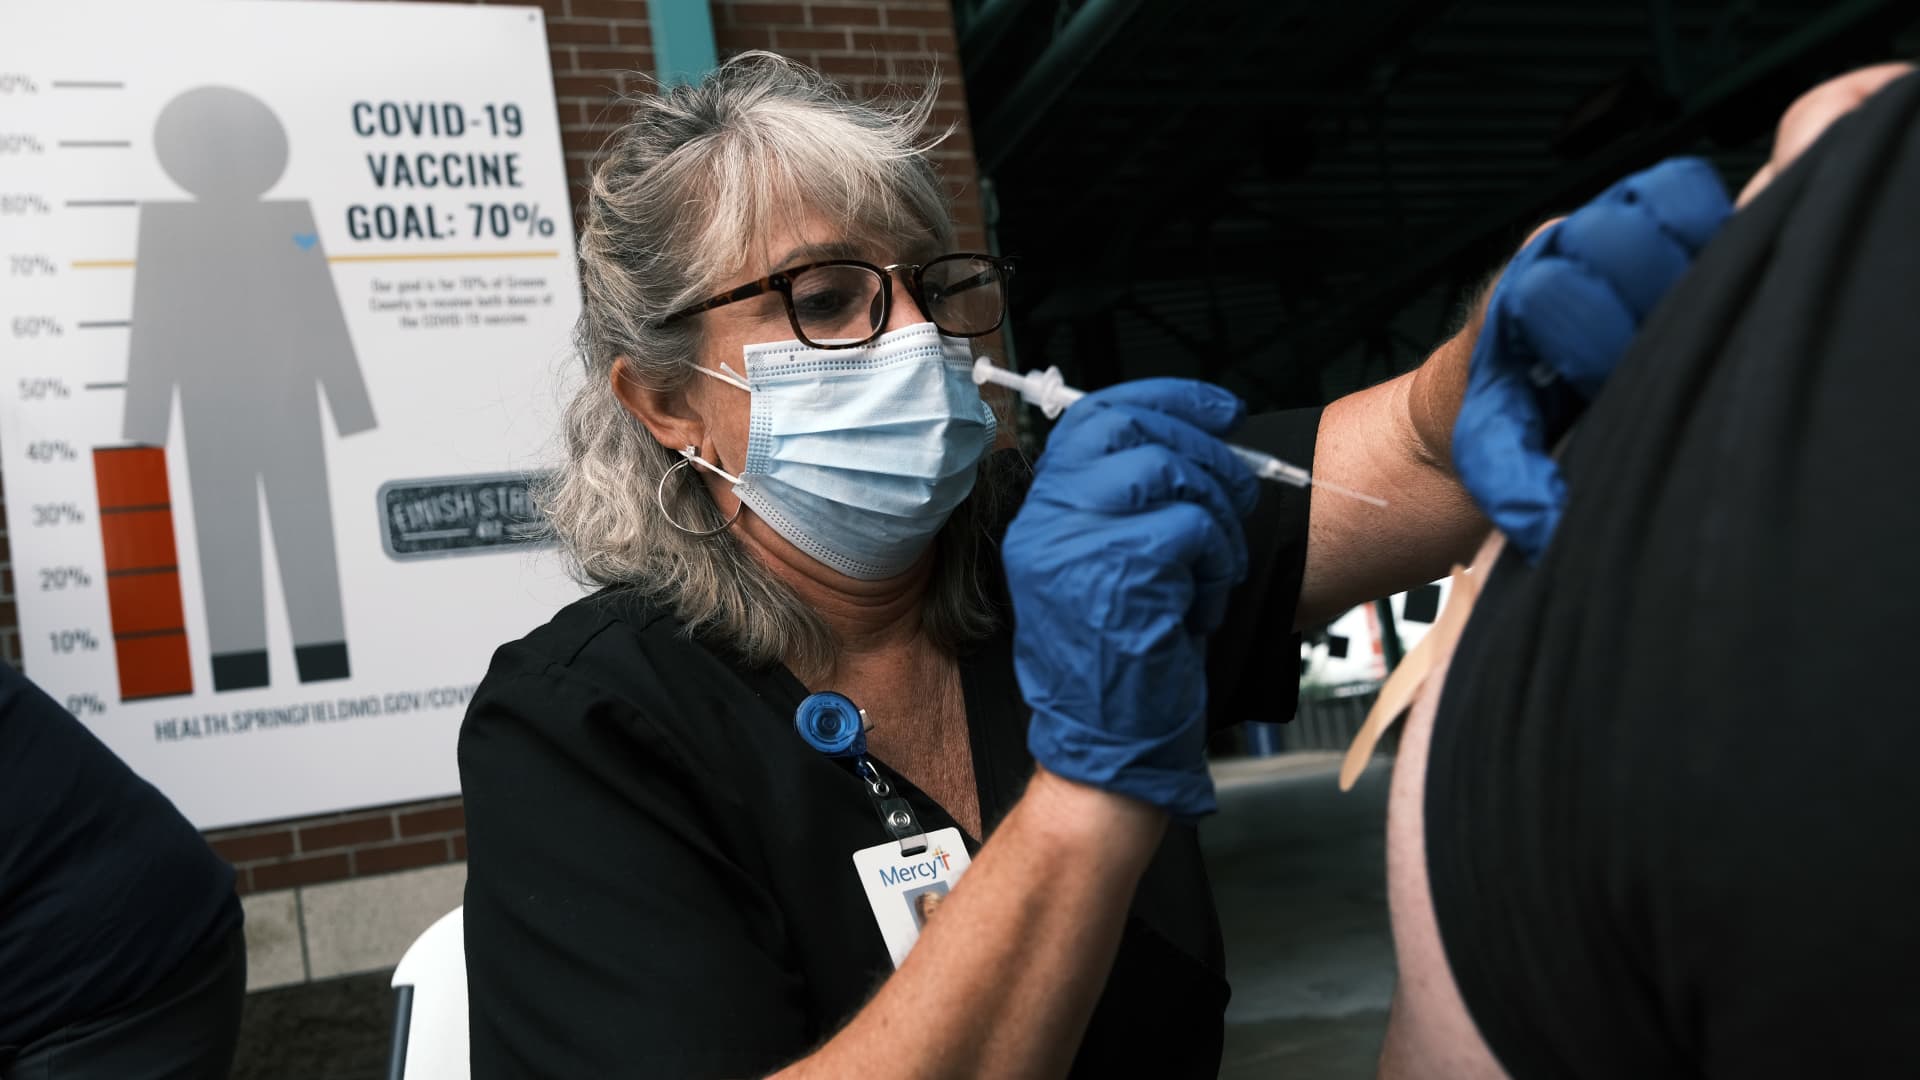 A nurse administers the Covid-19 vaccine at a baseball game on August 05, 2021 in Springfield, Missouri. According to the latest numbers from the state’s health department, little more than 4 in 10 Missourians have received the Covid-19 vaccine.